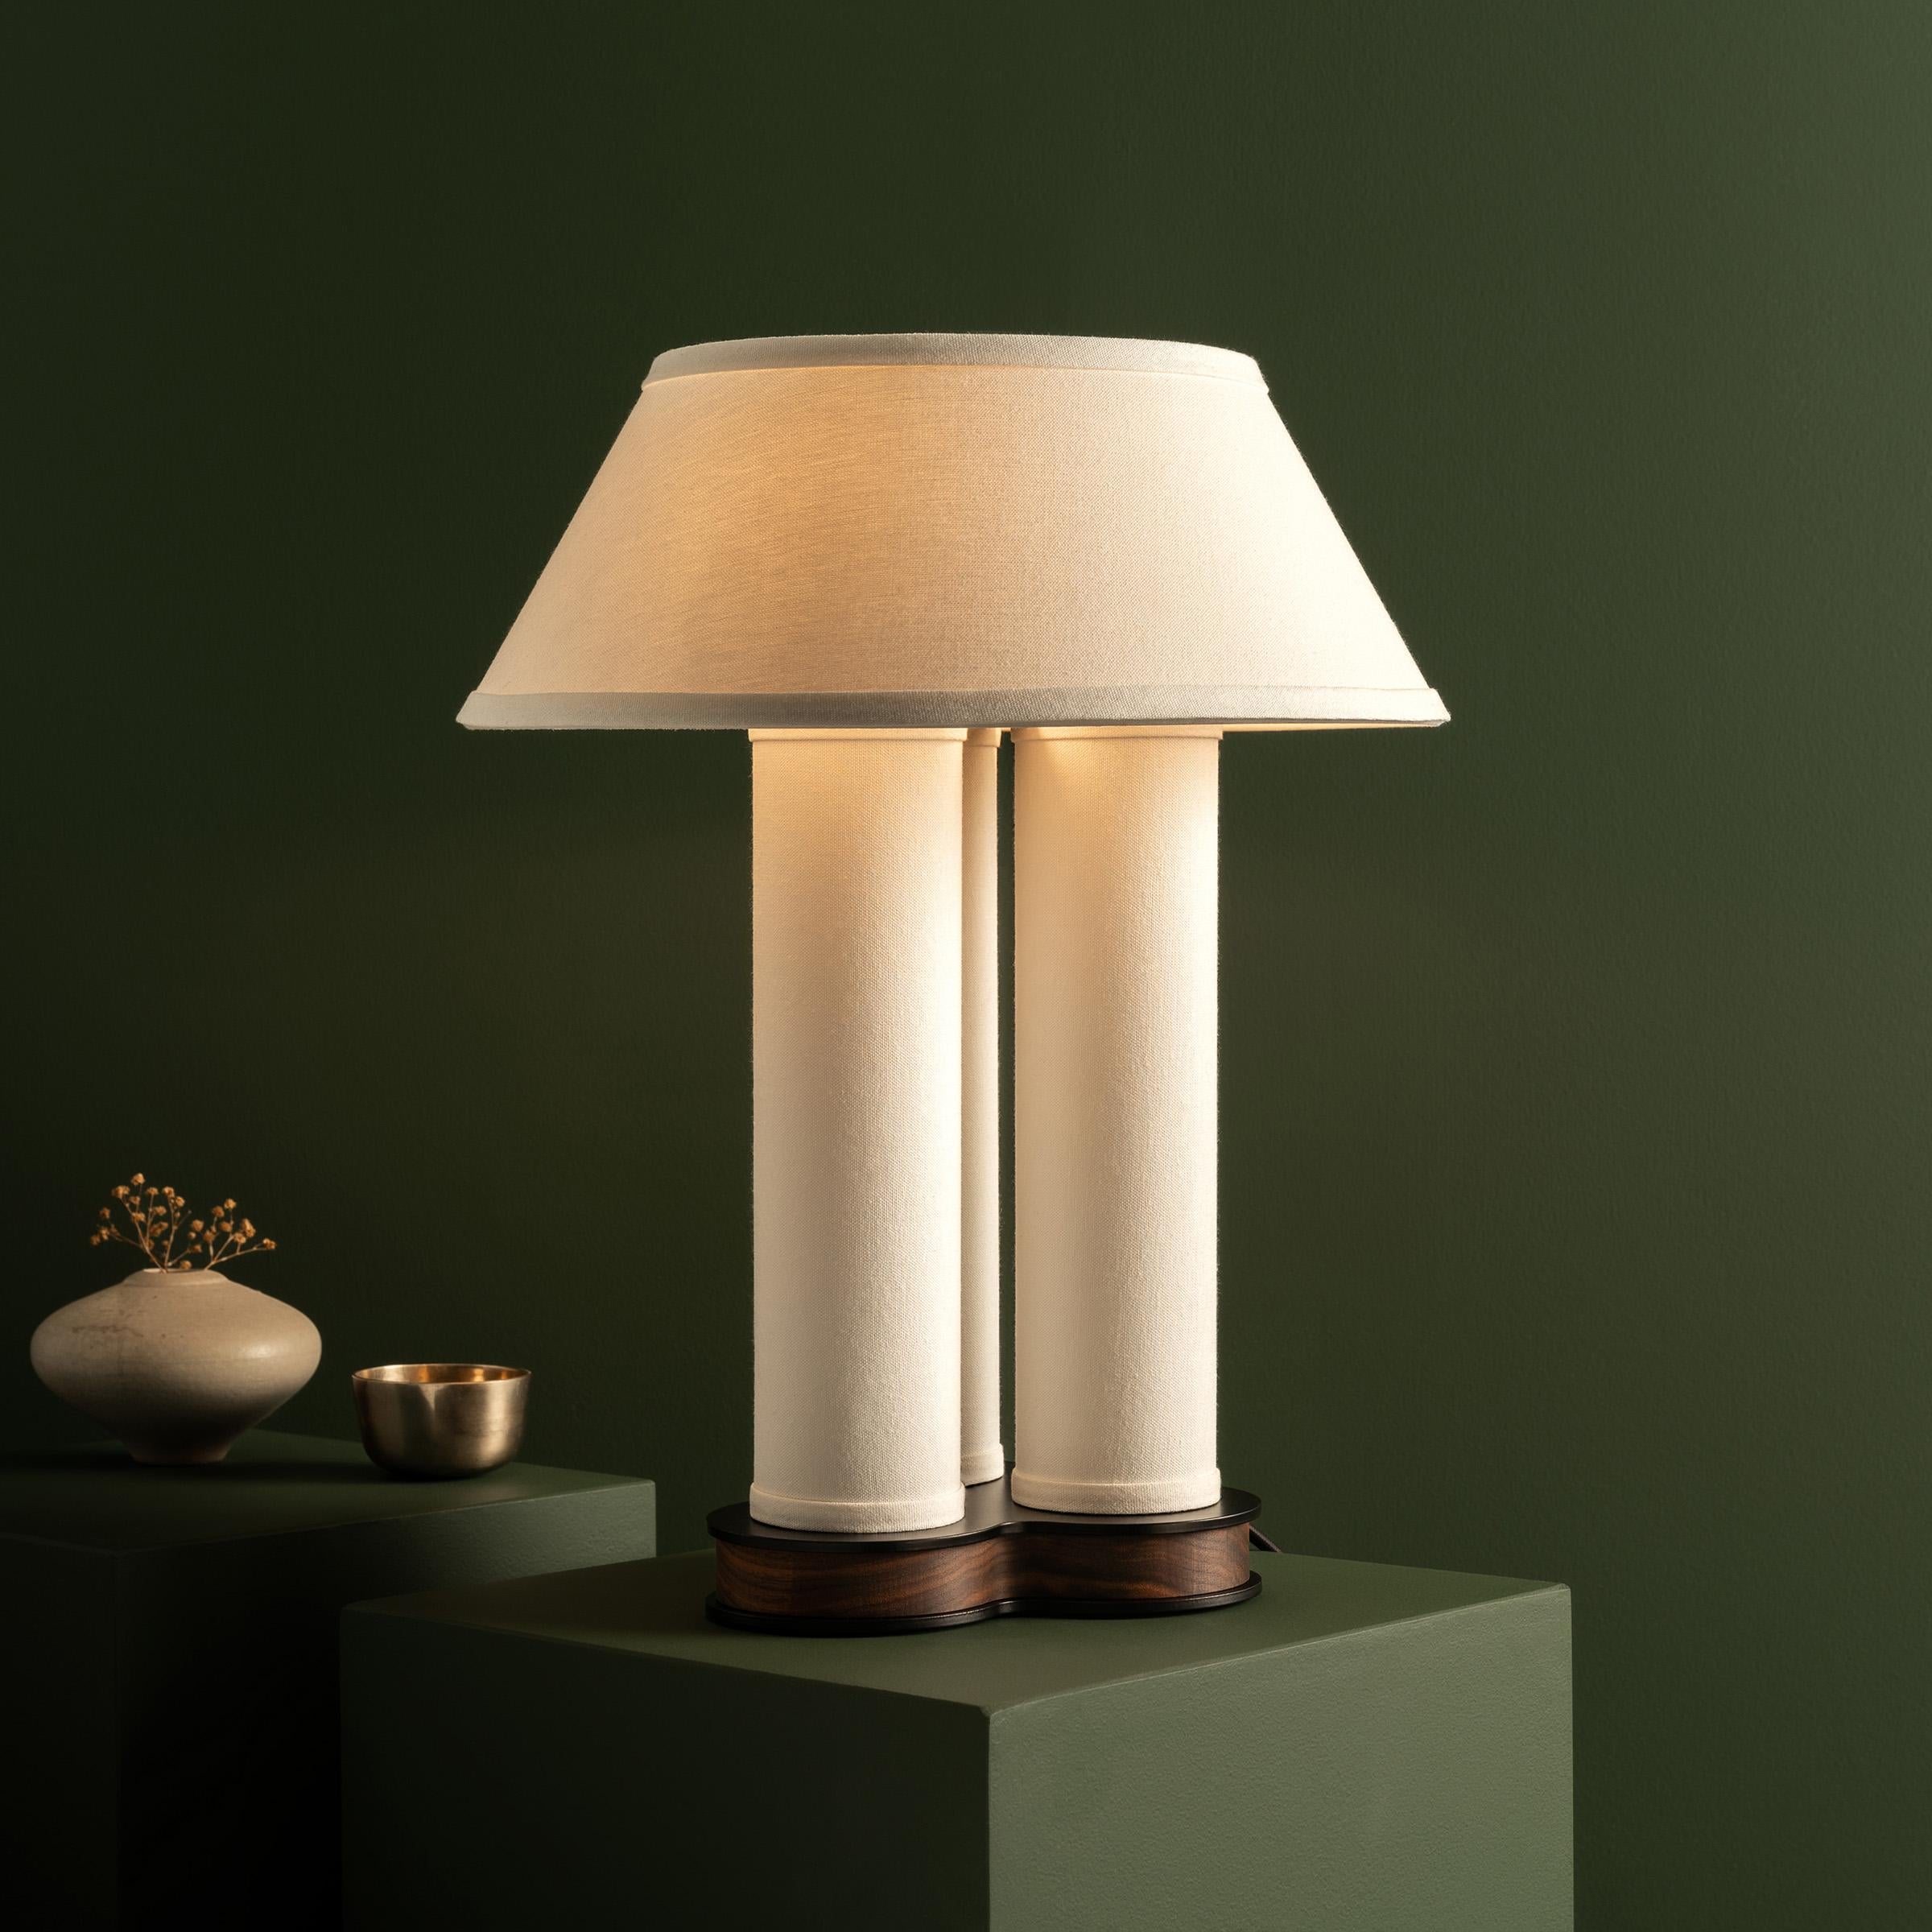 Our clover-shaped table lamp compels attention with both organic flow and precise symmetry. The gracefully curved design features a touch-sensitive switch for easy on/off. The optional diffusor softens the light above, while the three-column shade